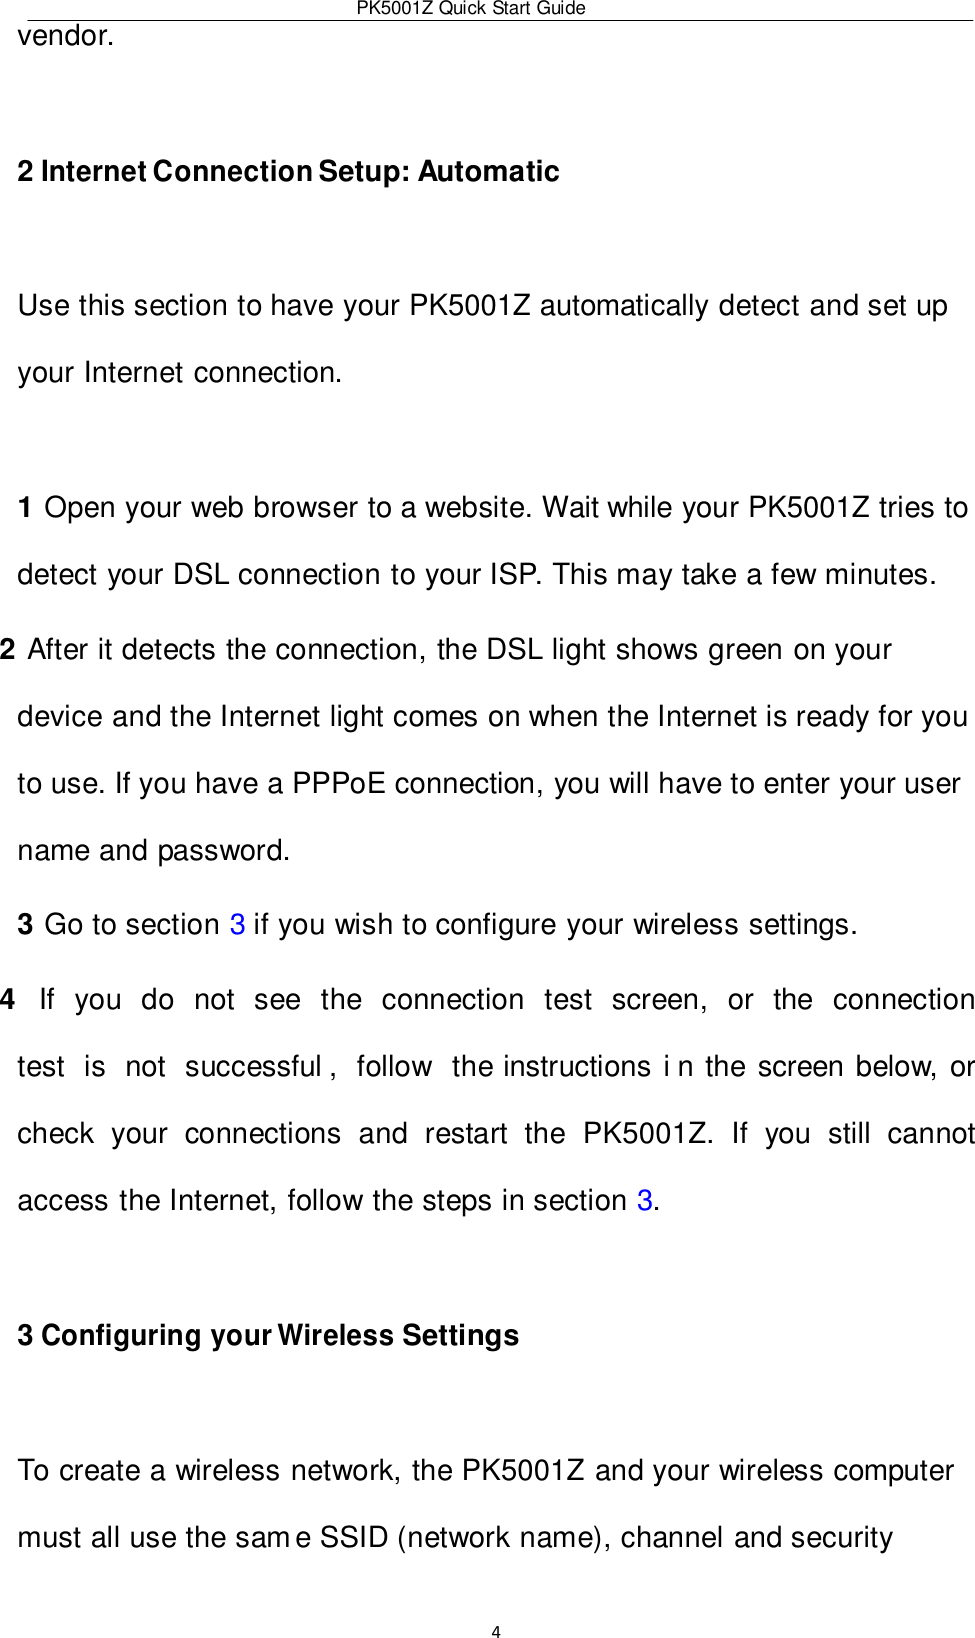 PK5001Z Quick Start Guide  4  vendor.  2 Internet Connection Setup: Automatic  Use this section to have your PK5001Z automatically detect and set up your Internet connection.  1 Open your web browser to a website. Wait while your PK5001Z tries to detect your DSL connection to your ISP. This may take a few minutes. 2 After it detects the connection, the DSL light shows green on your device and the Internet light comes on when the Internet is ready for you to use. If you have a PPPoE connection, you will have to enter your user name and password. 3 Go to section 3 if you wish to configure your wireless settings. 4  If  you  do  not  see  the  connection  test  screen,  or  the  connection  test  is  not  successful ,  follow  the instructions i n the screen below, or check  your  connections  and  restart  the  PK5001Z.  If  you  still  cannot access the Internet, follow the steps in section 3.  3 Configuring your Wireless Settings  To create a wireless network, the PK5001Z and your wireless computer must all use the sam e SSID (network name), channel and security 